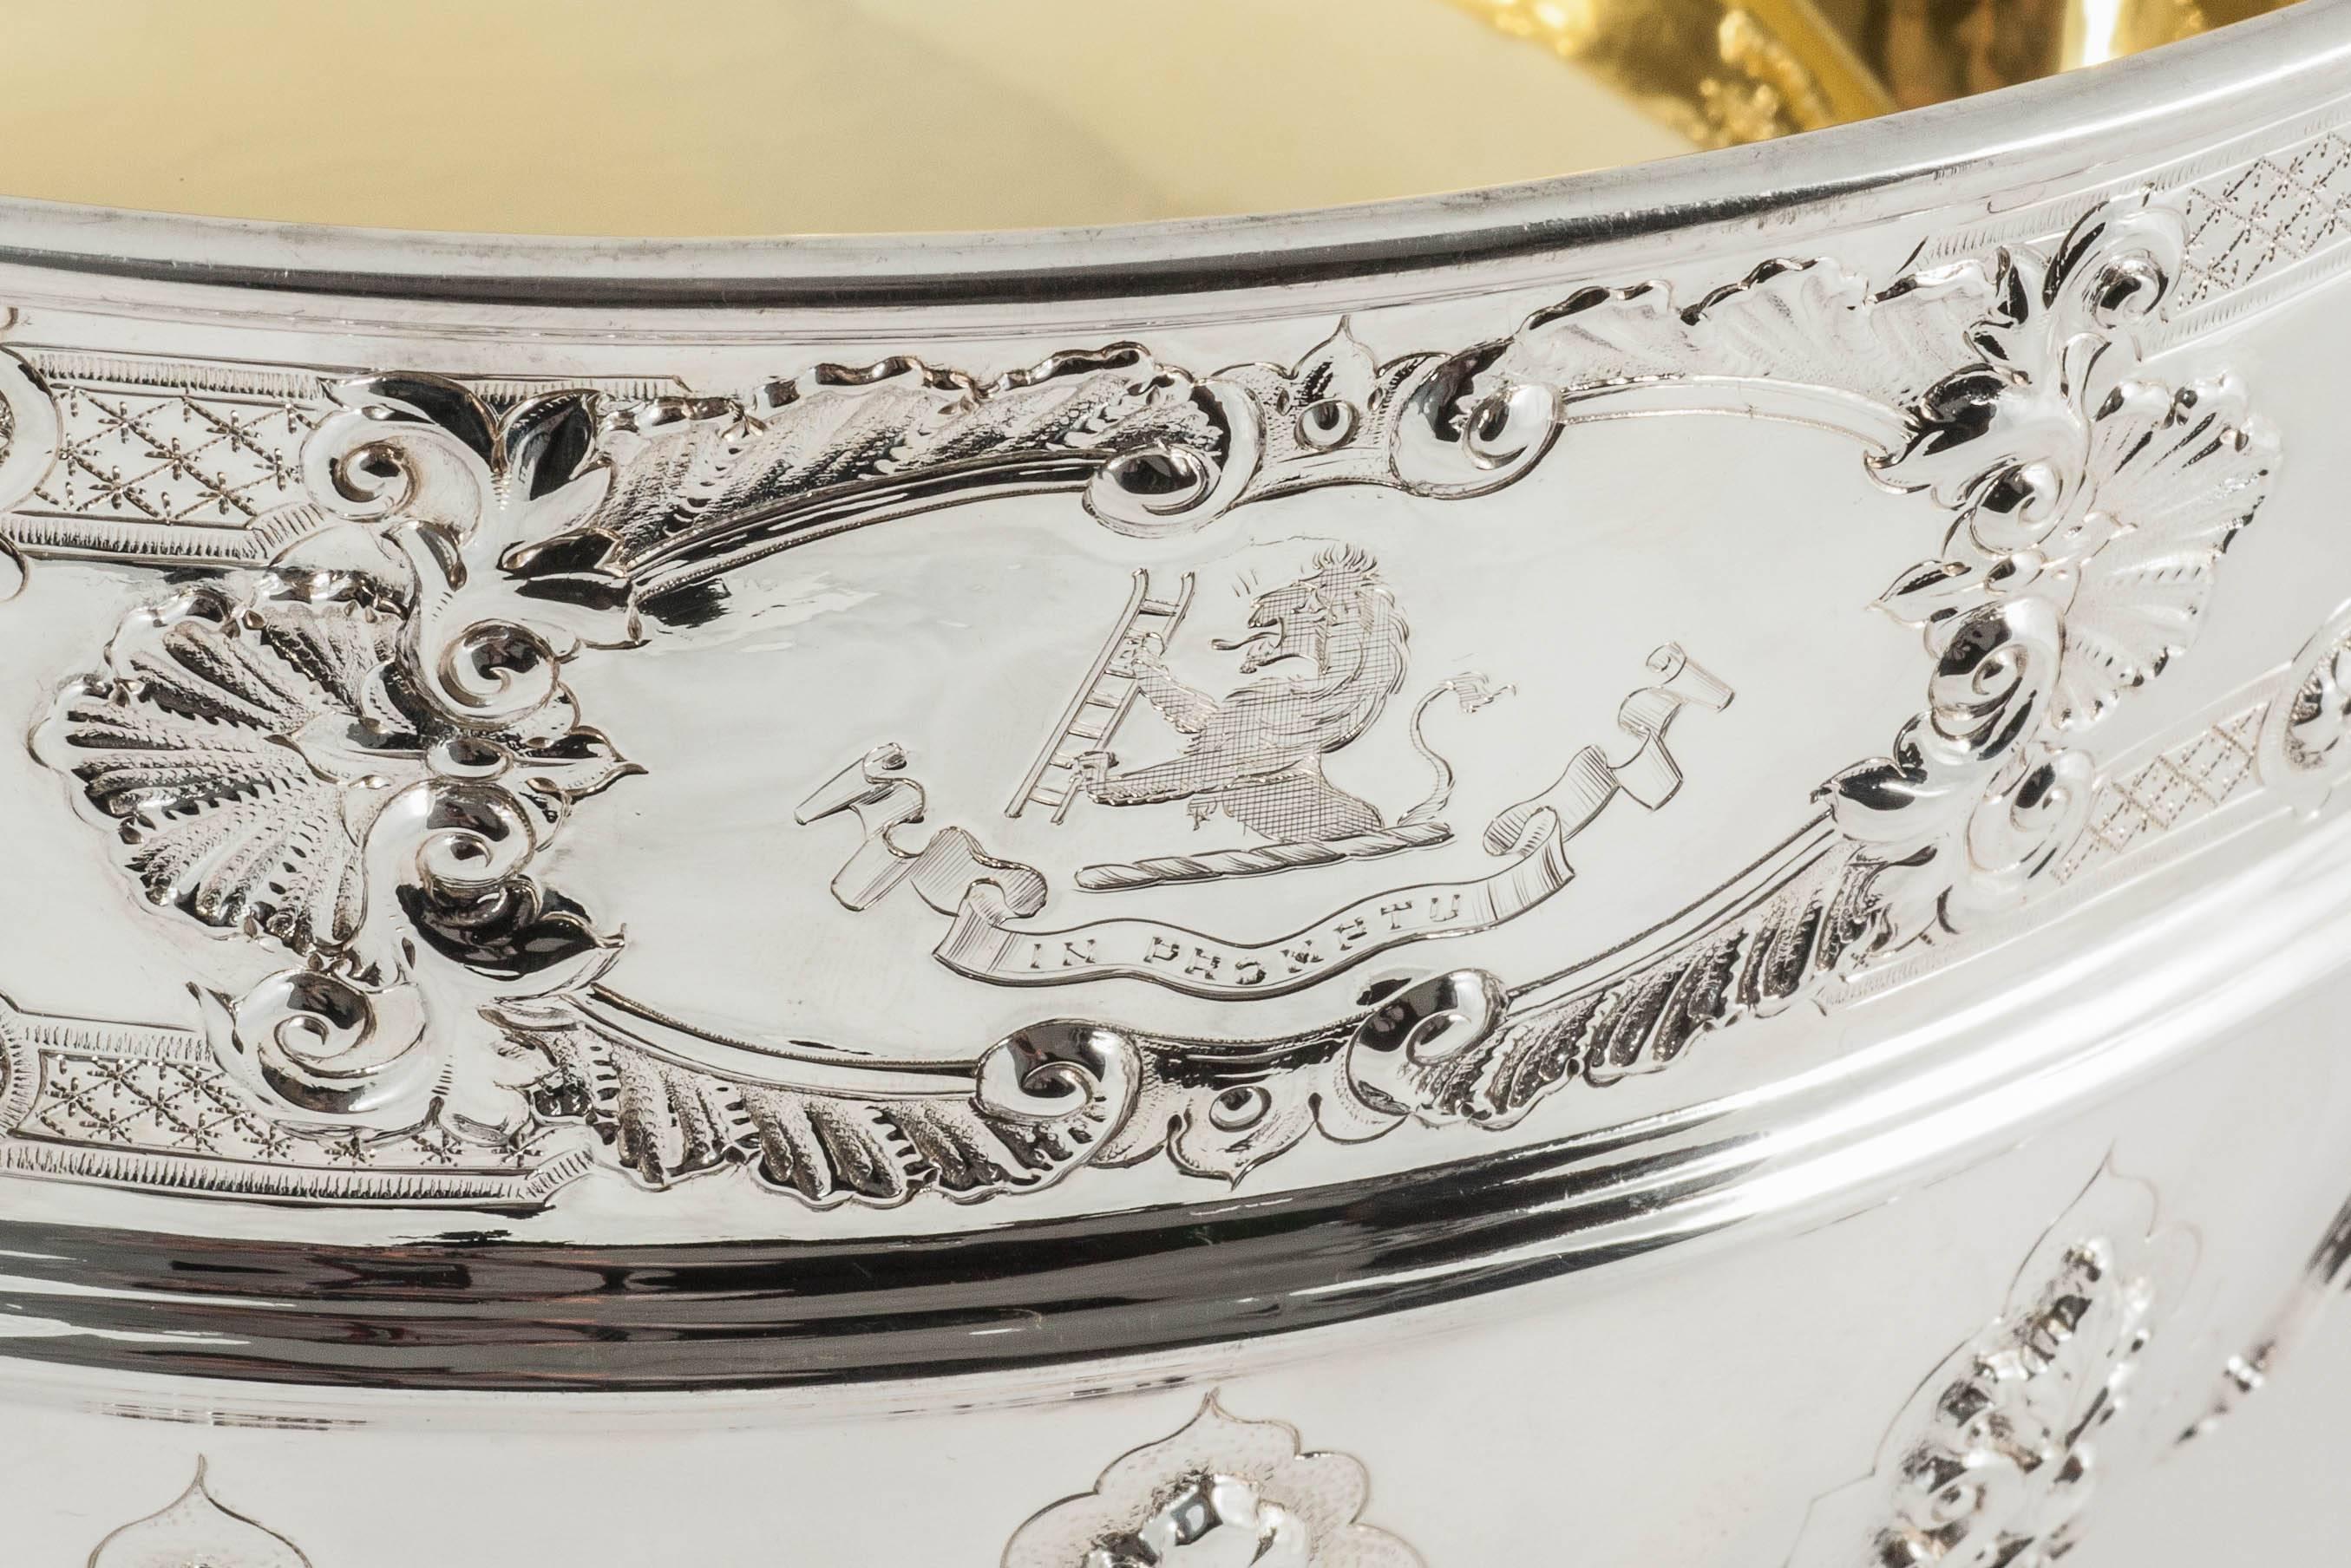 A heavy quality sterling silver Victorian rose bowl or punch bowl with gold plated interior. This impressive piece, in the George II style, has a band of hand-chased lattice, leaf and shell designs above the central girdle and cast and applied strap